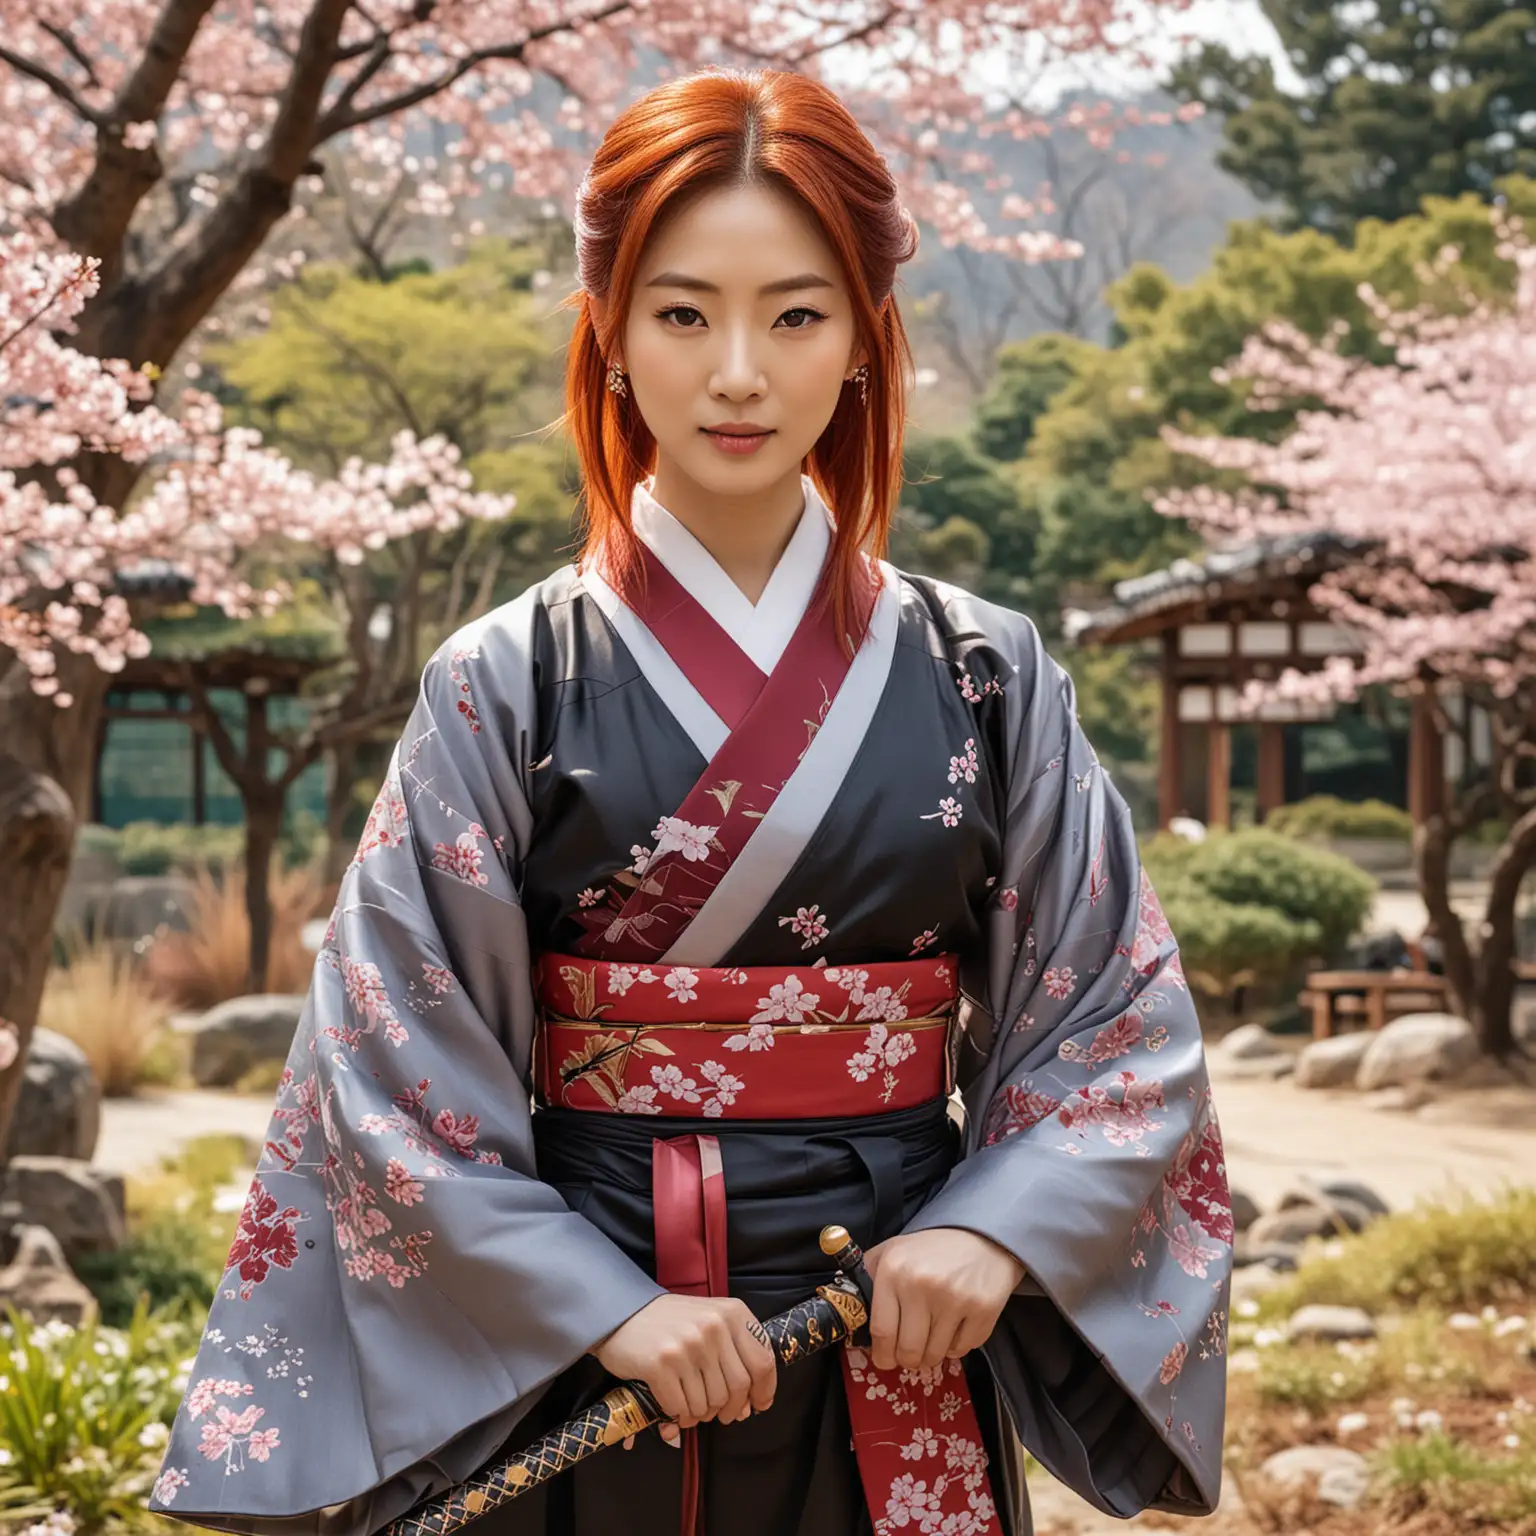 A 40 years old Bae Doon as a futuristic Korean swordswoman. She is dressed in a high-tech kimono. She is in a Japanese garden with blossom all over the ground. She has red hair, looks confident, large eyes with a wry smile, ready for sword practice 